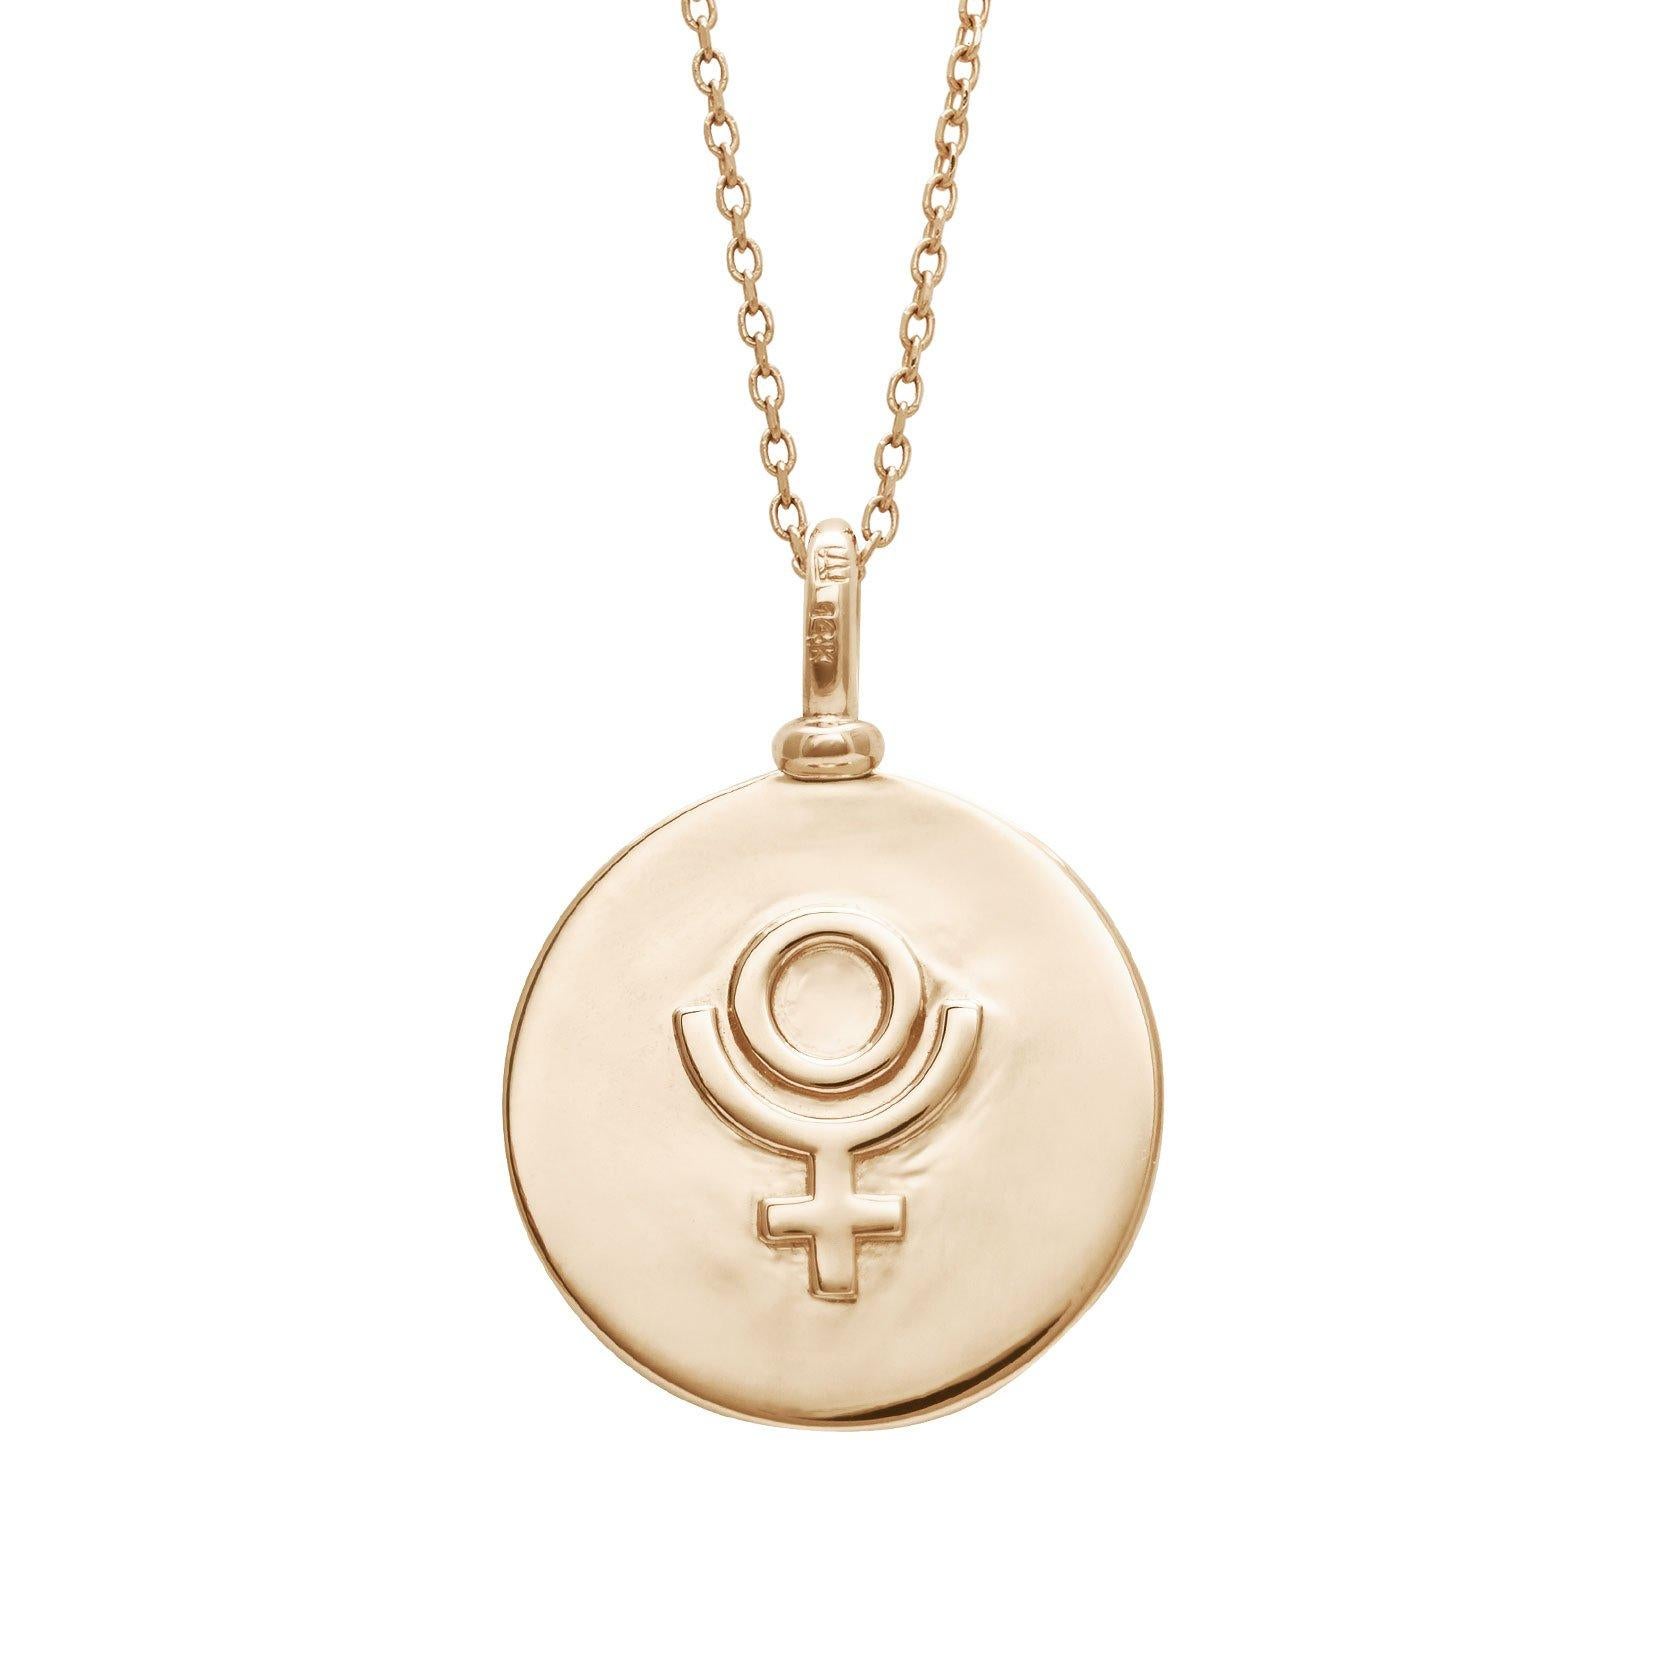 18mm, 14k yellow gold pendant with Scorpio sign and 0.13 ctw white diamond (11 stones) constellation. The back of the pendant holds Scorpio's ruling planet, Pluto. 16